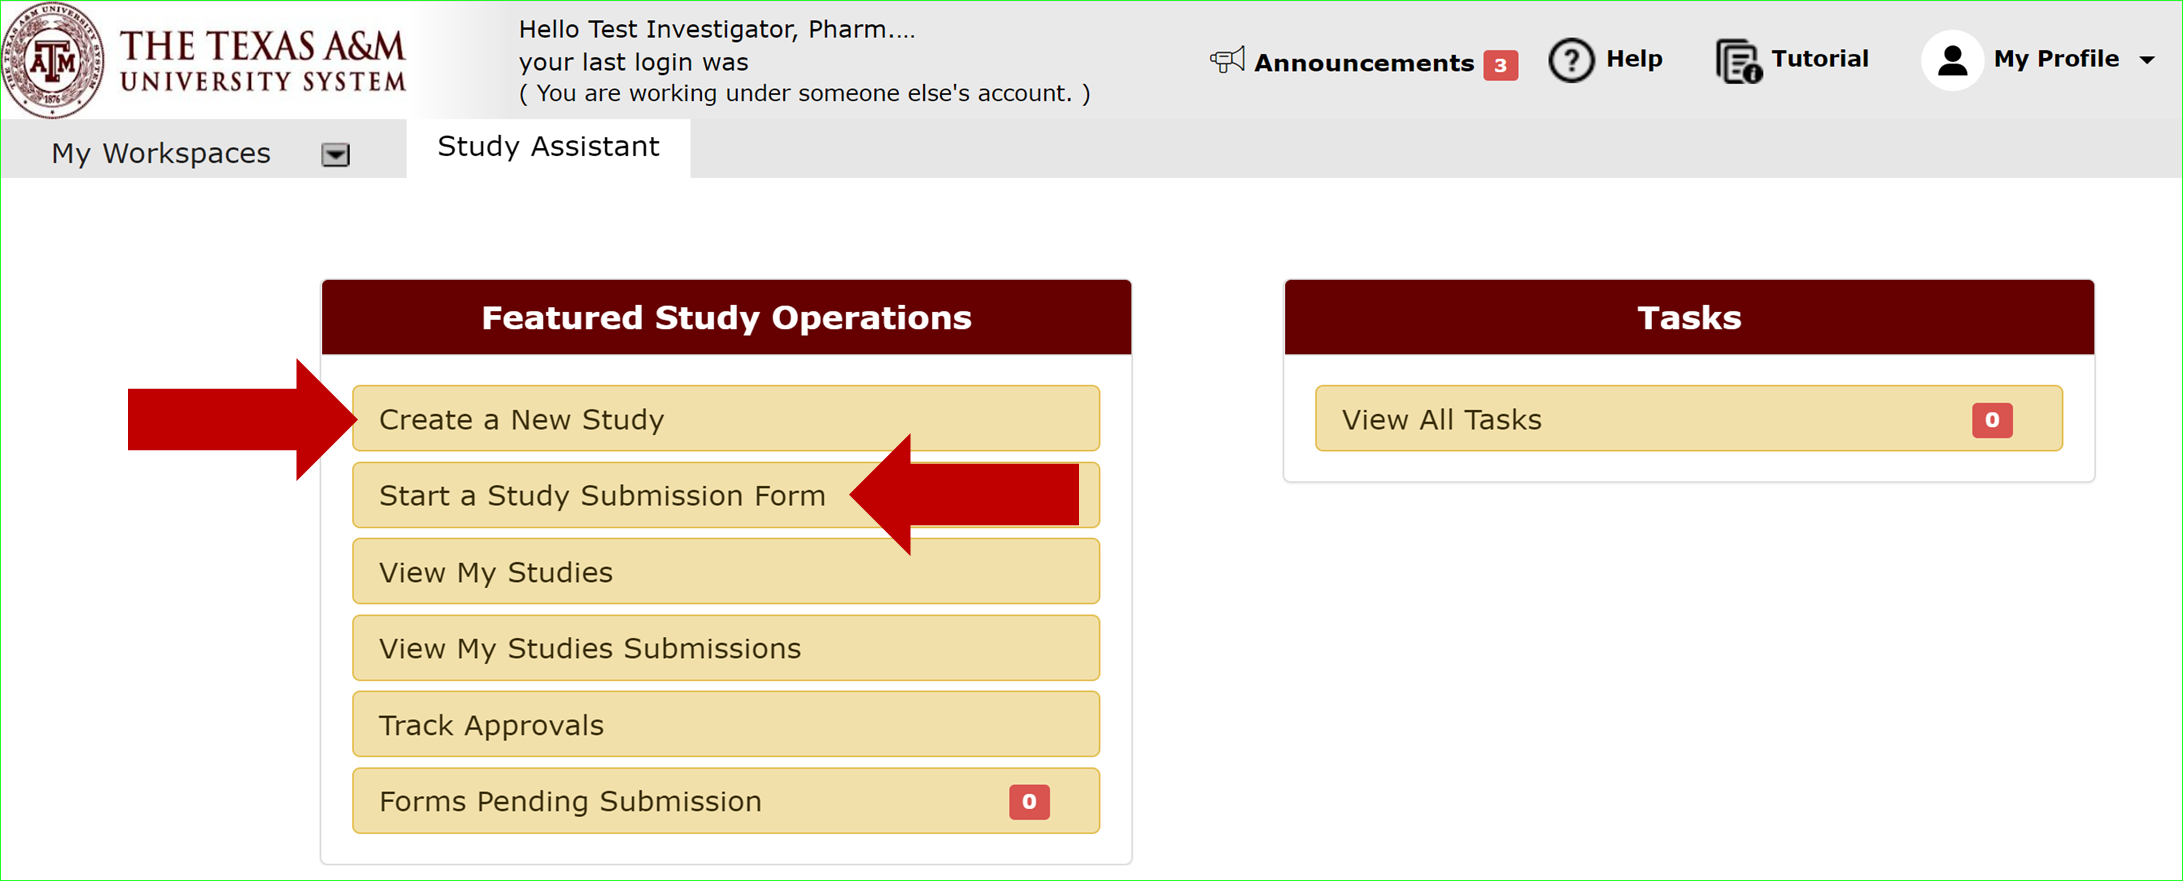 Image with arrows pointing to different areas on screenshot of iRIS portal - "Create a New Study" and "Start a Study Submission Form"